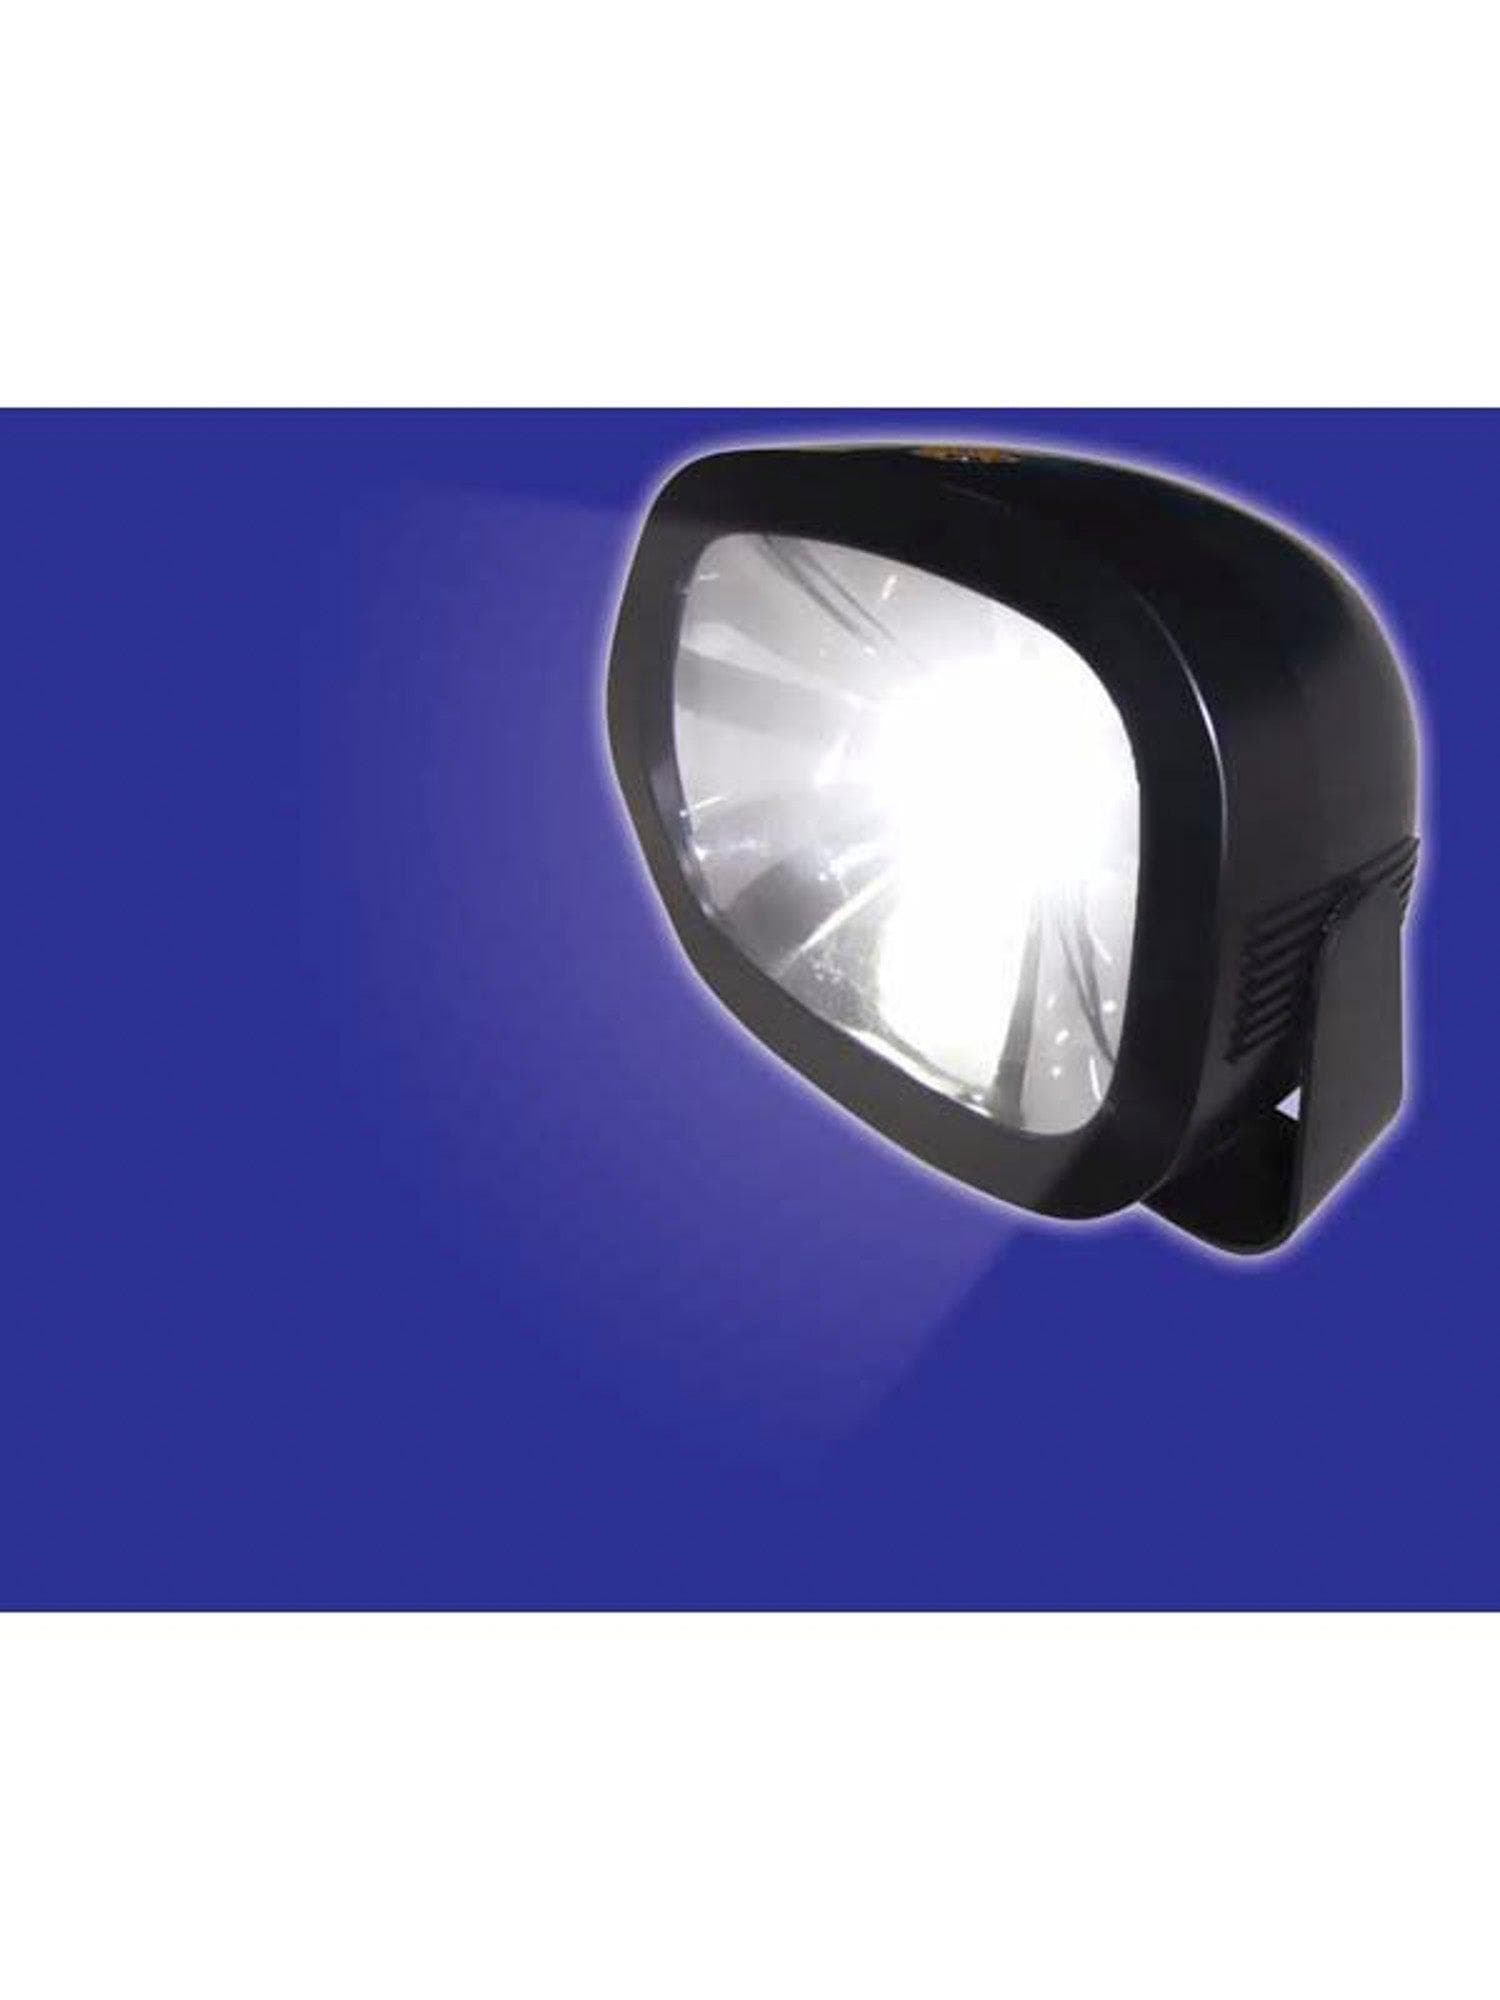 Battery Operated Strobe Light - costumes.com